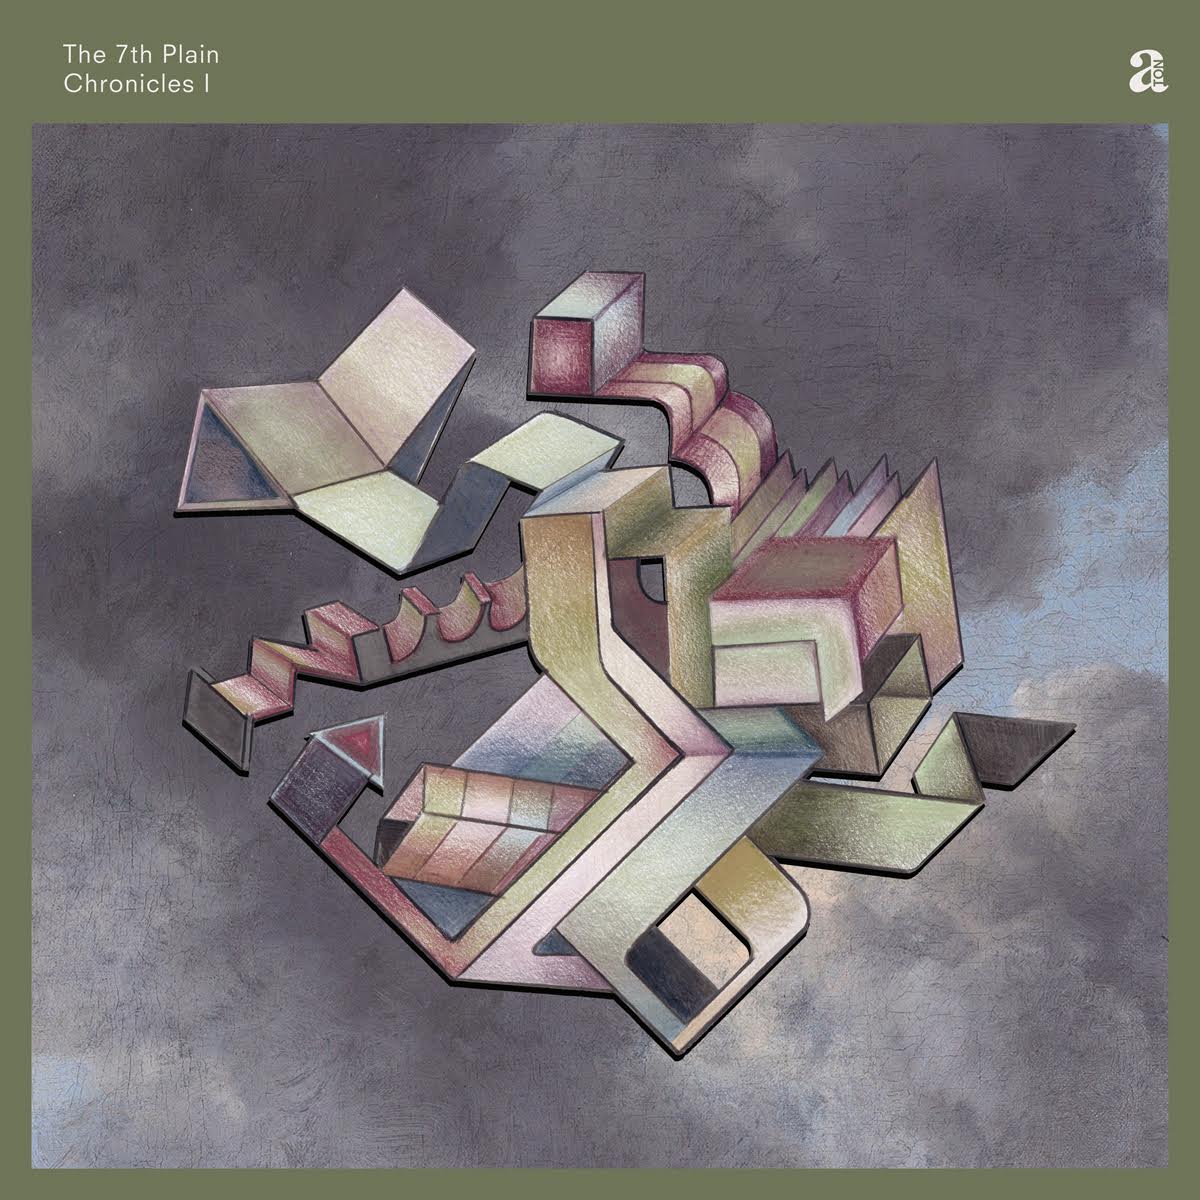 Album of the Week: The 7th Plain – Chronicles I